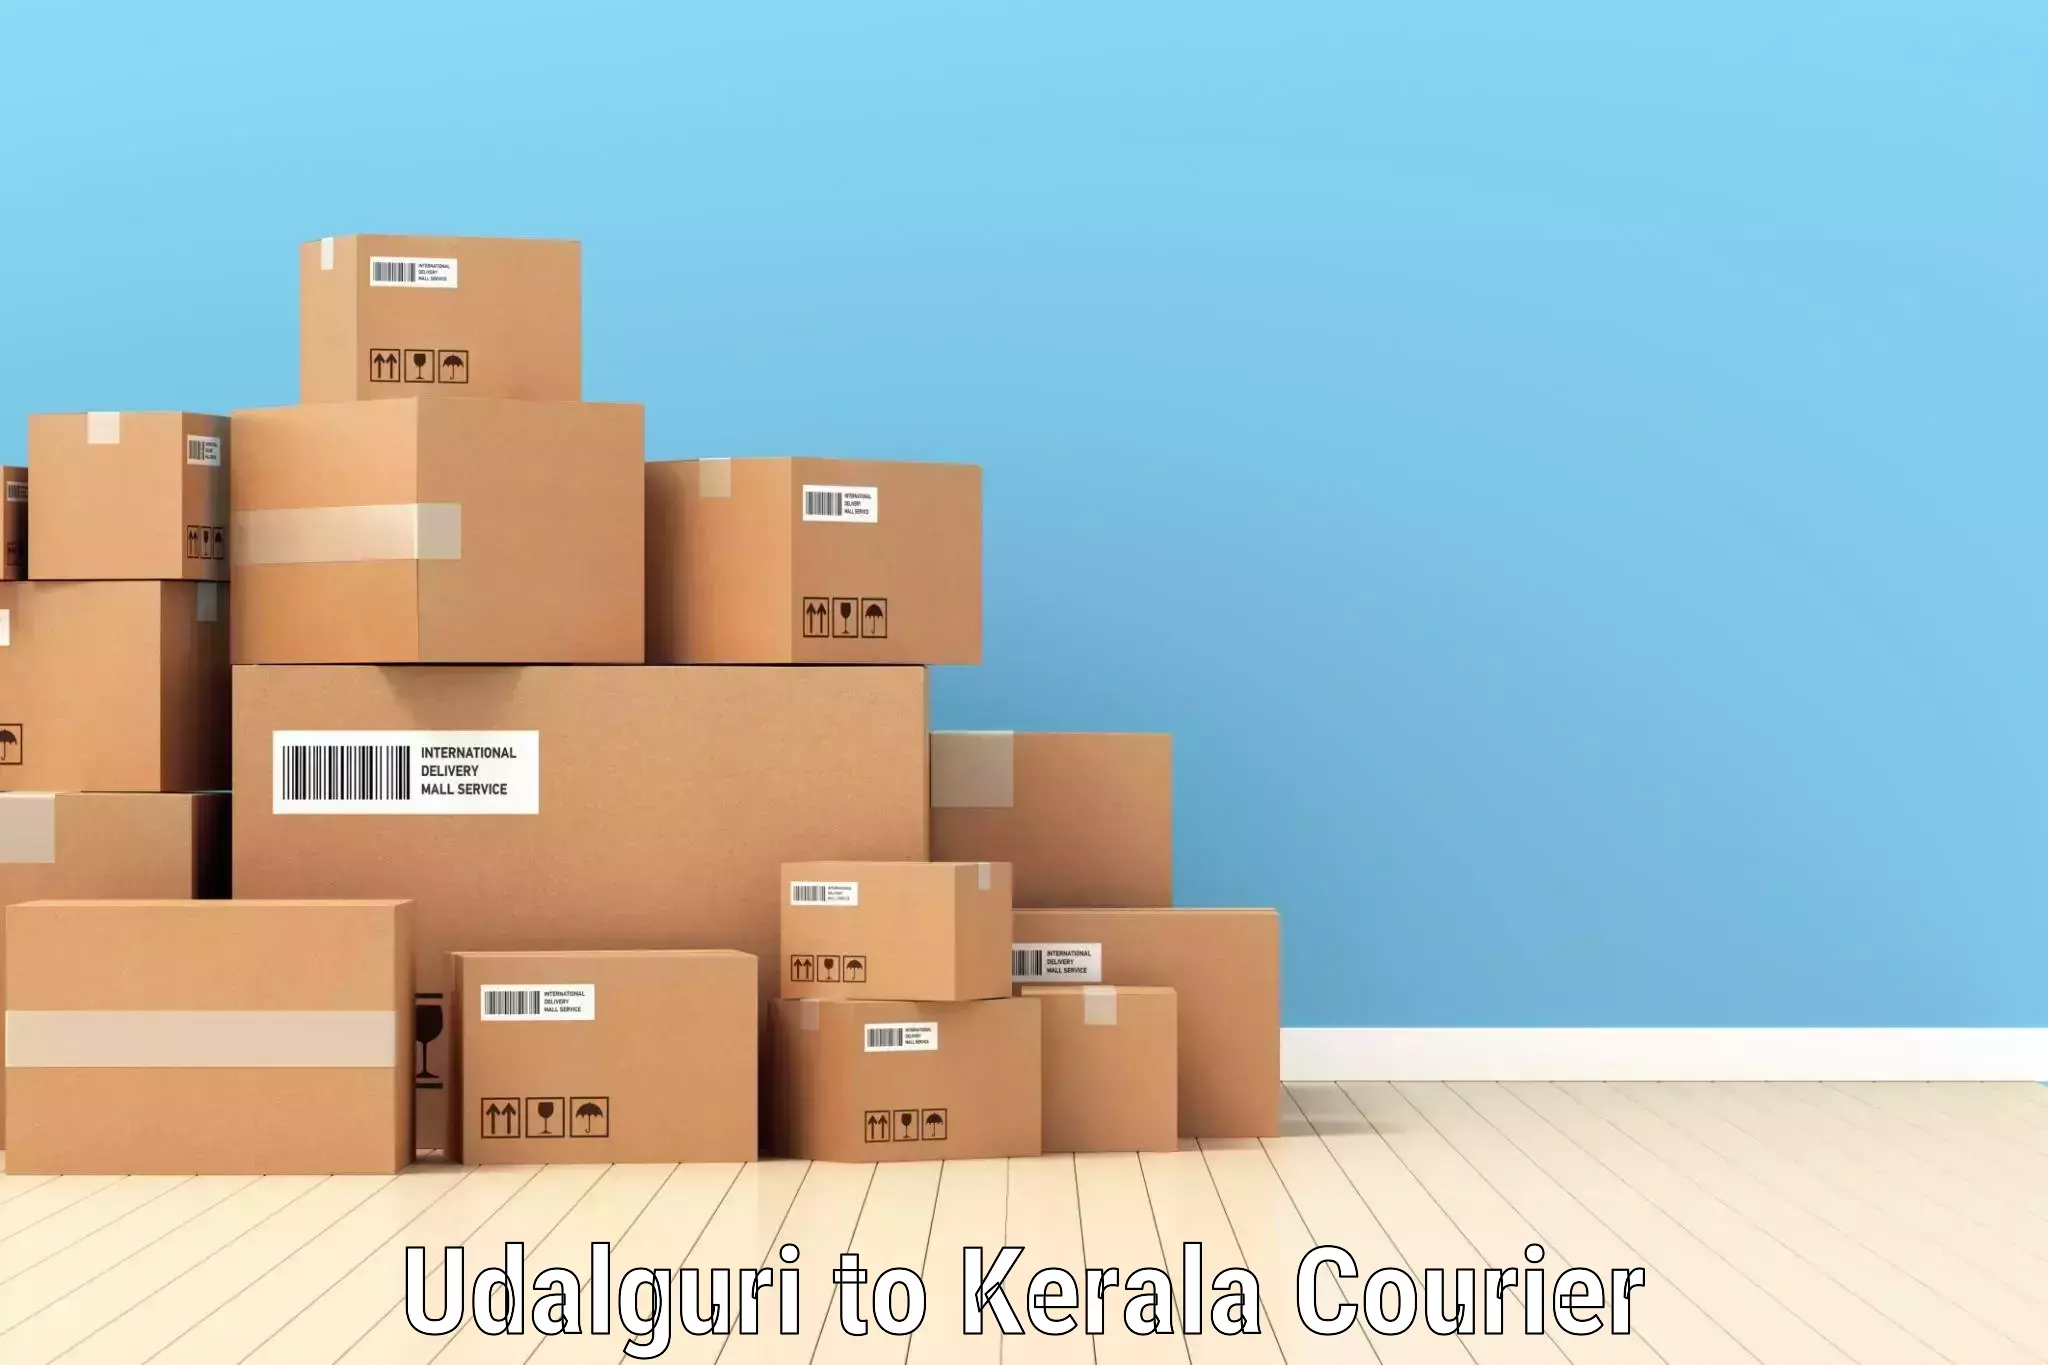 Reliable parcel services Udalguri to Ernakulam